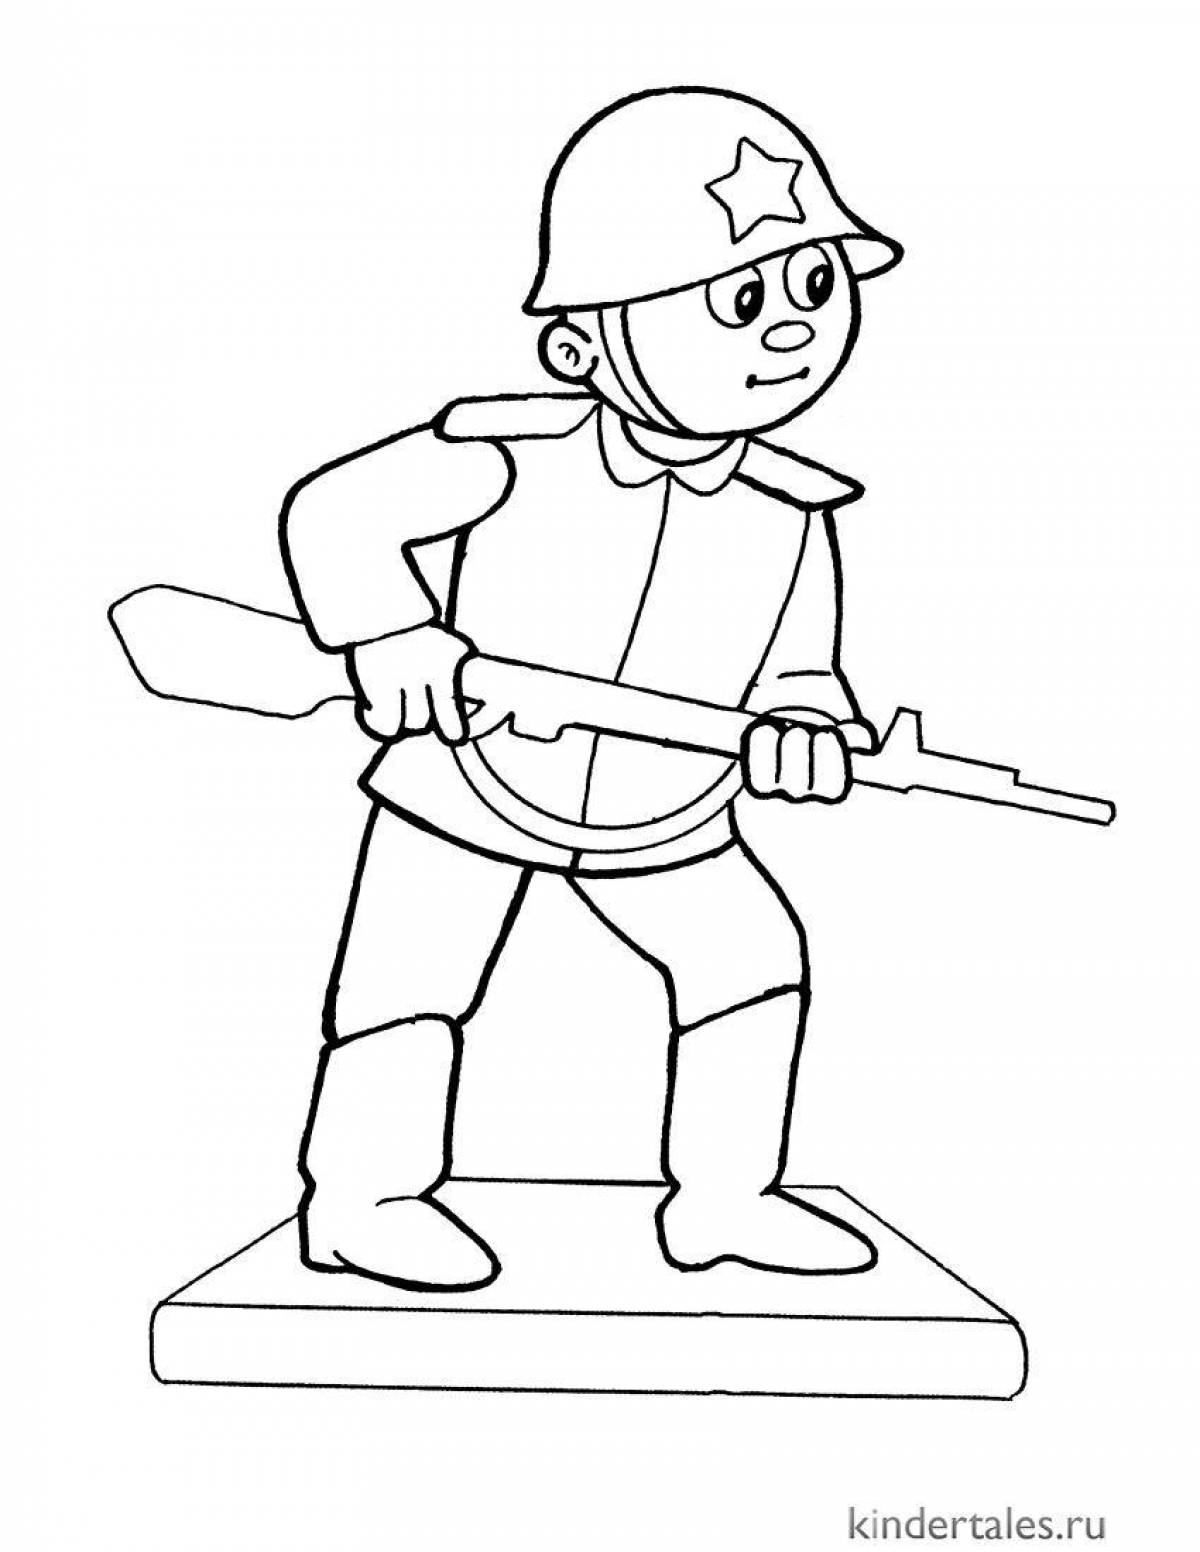 Playful our army native coloring book for preschoolers